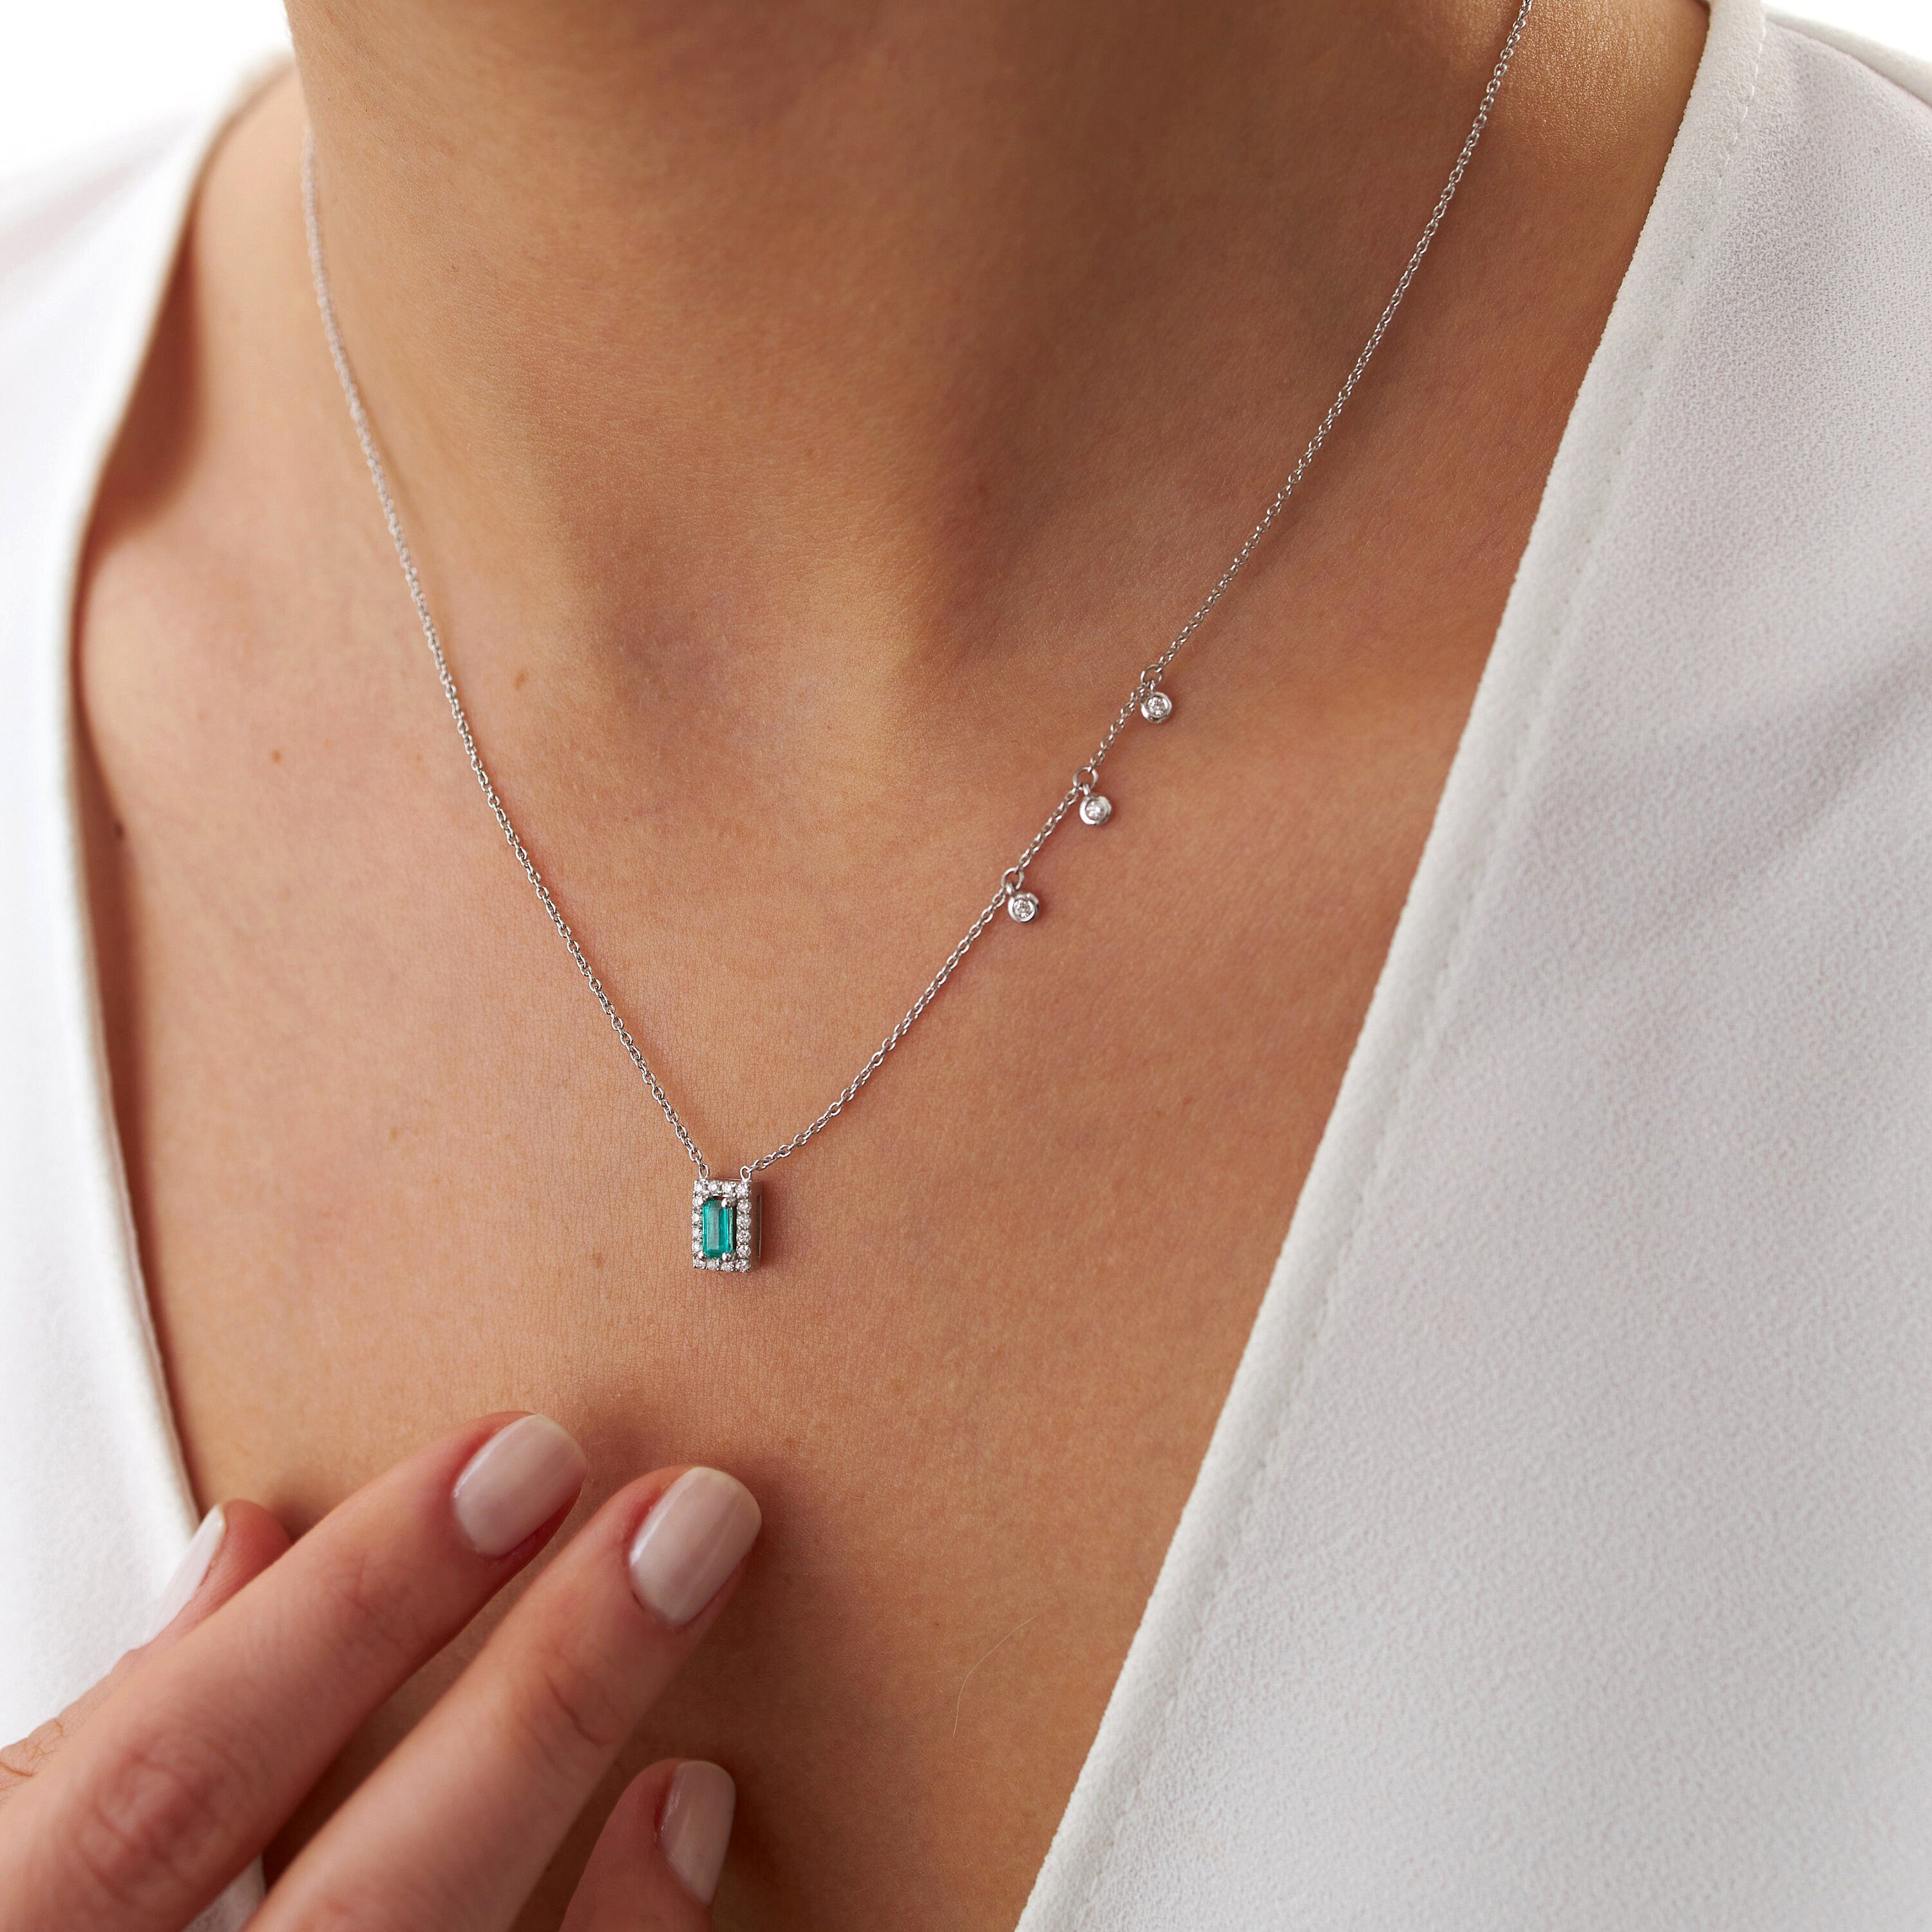 Asymmetric Emerald and Diamond Necklace Available in 14K and 18K Gold